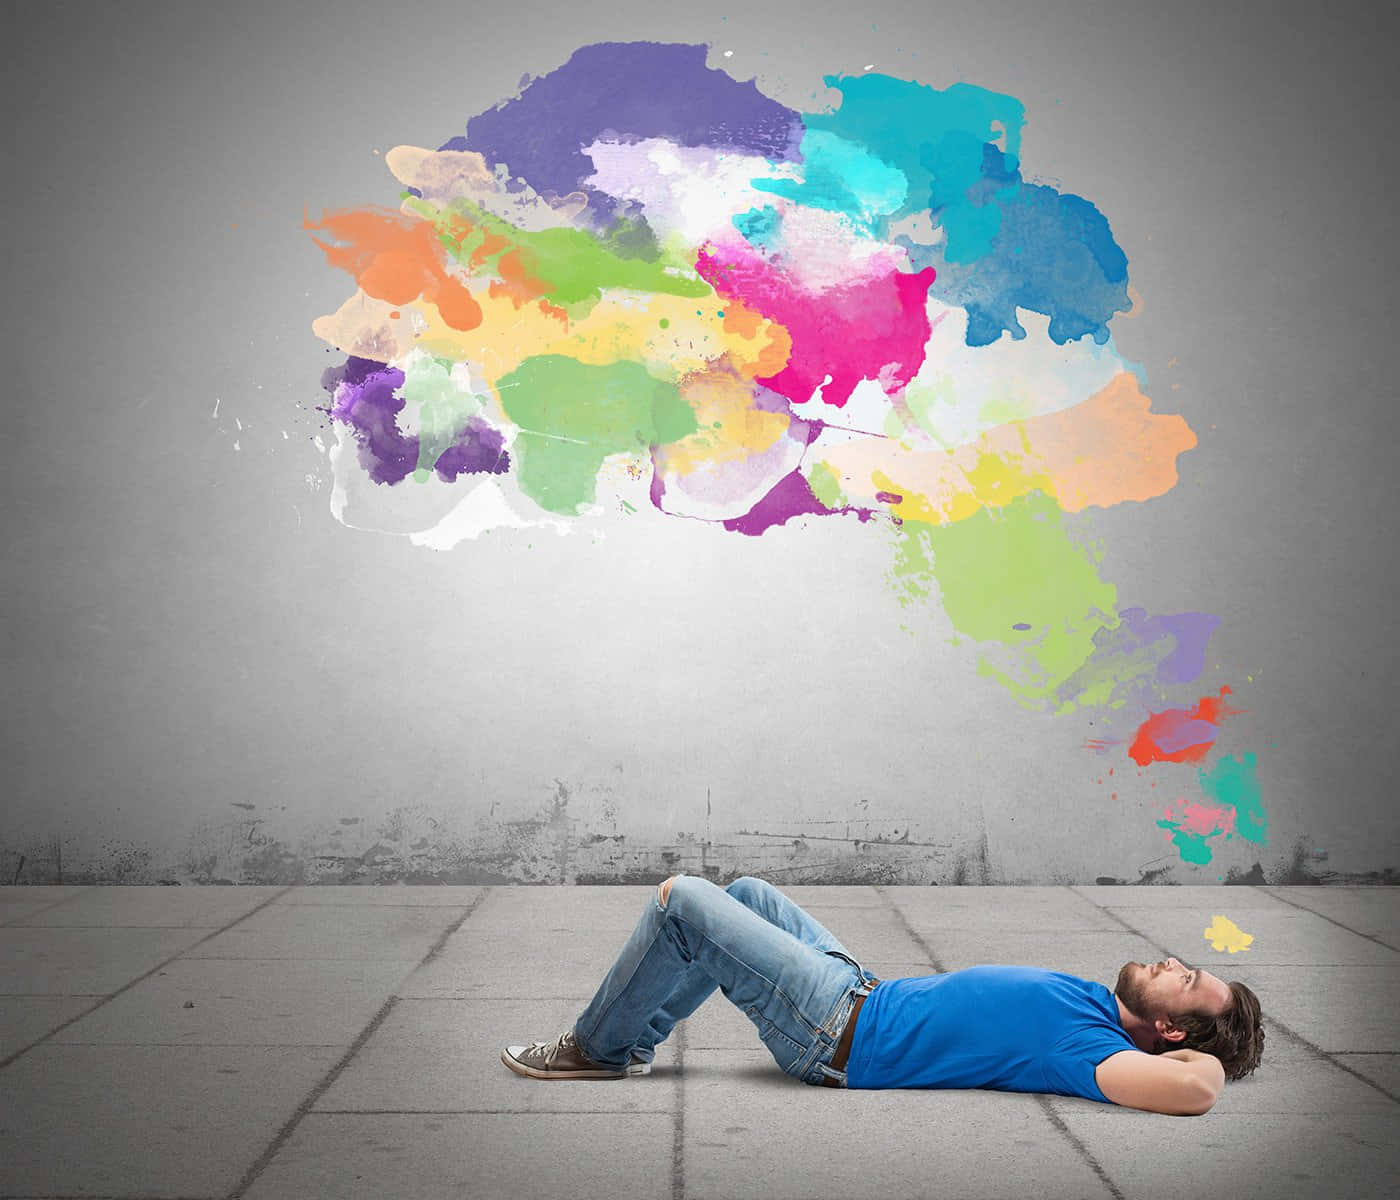 A Man Laying On The Ground With A Colorful Thought Cloud